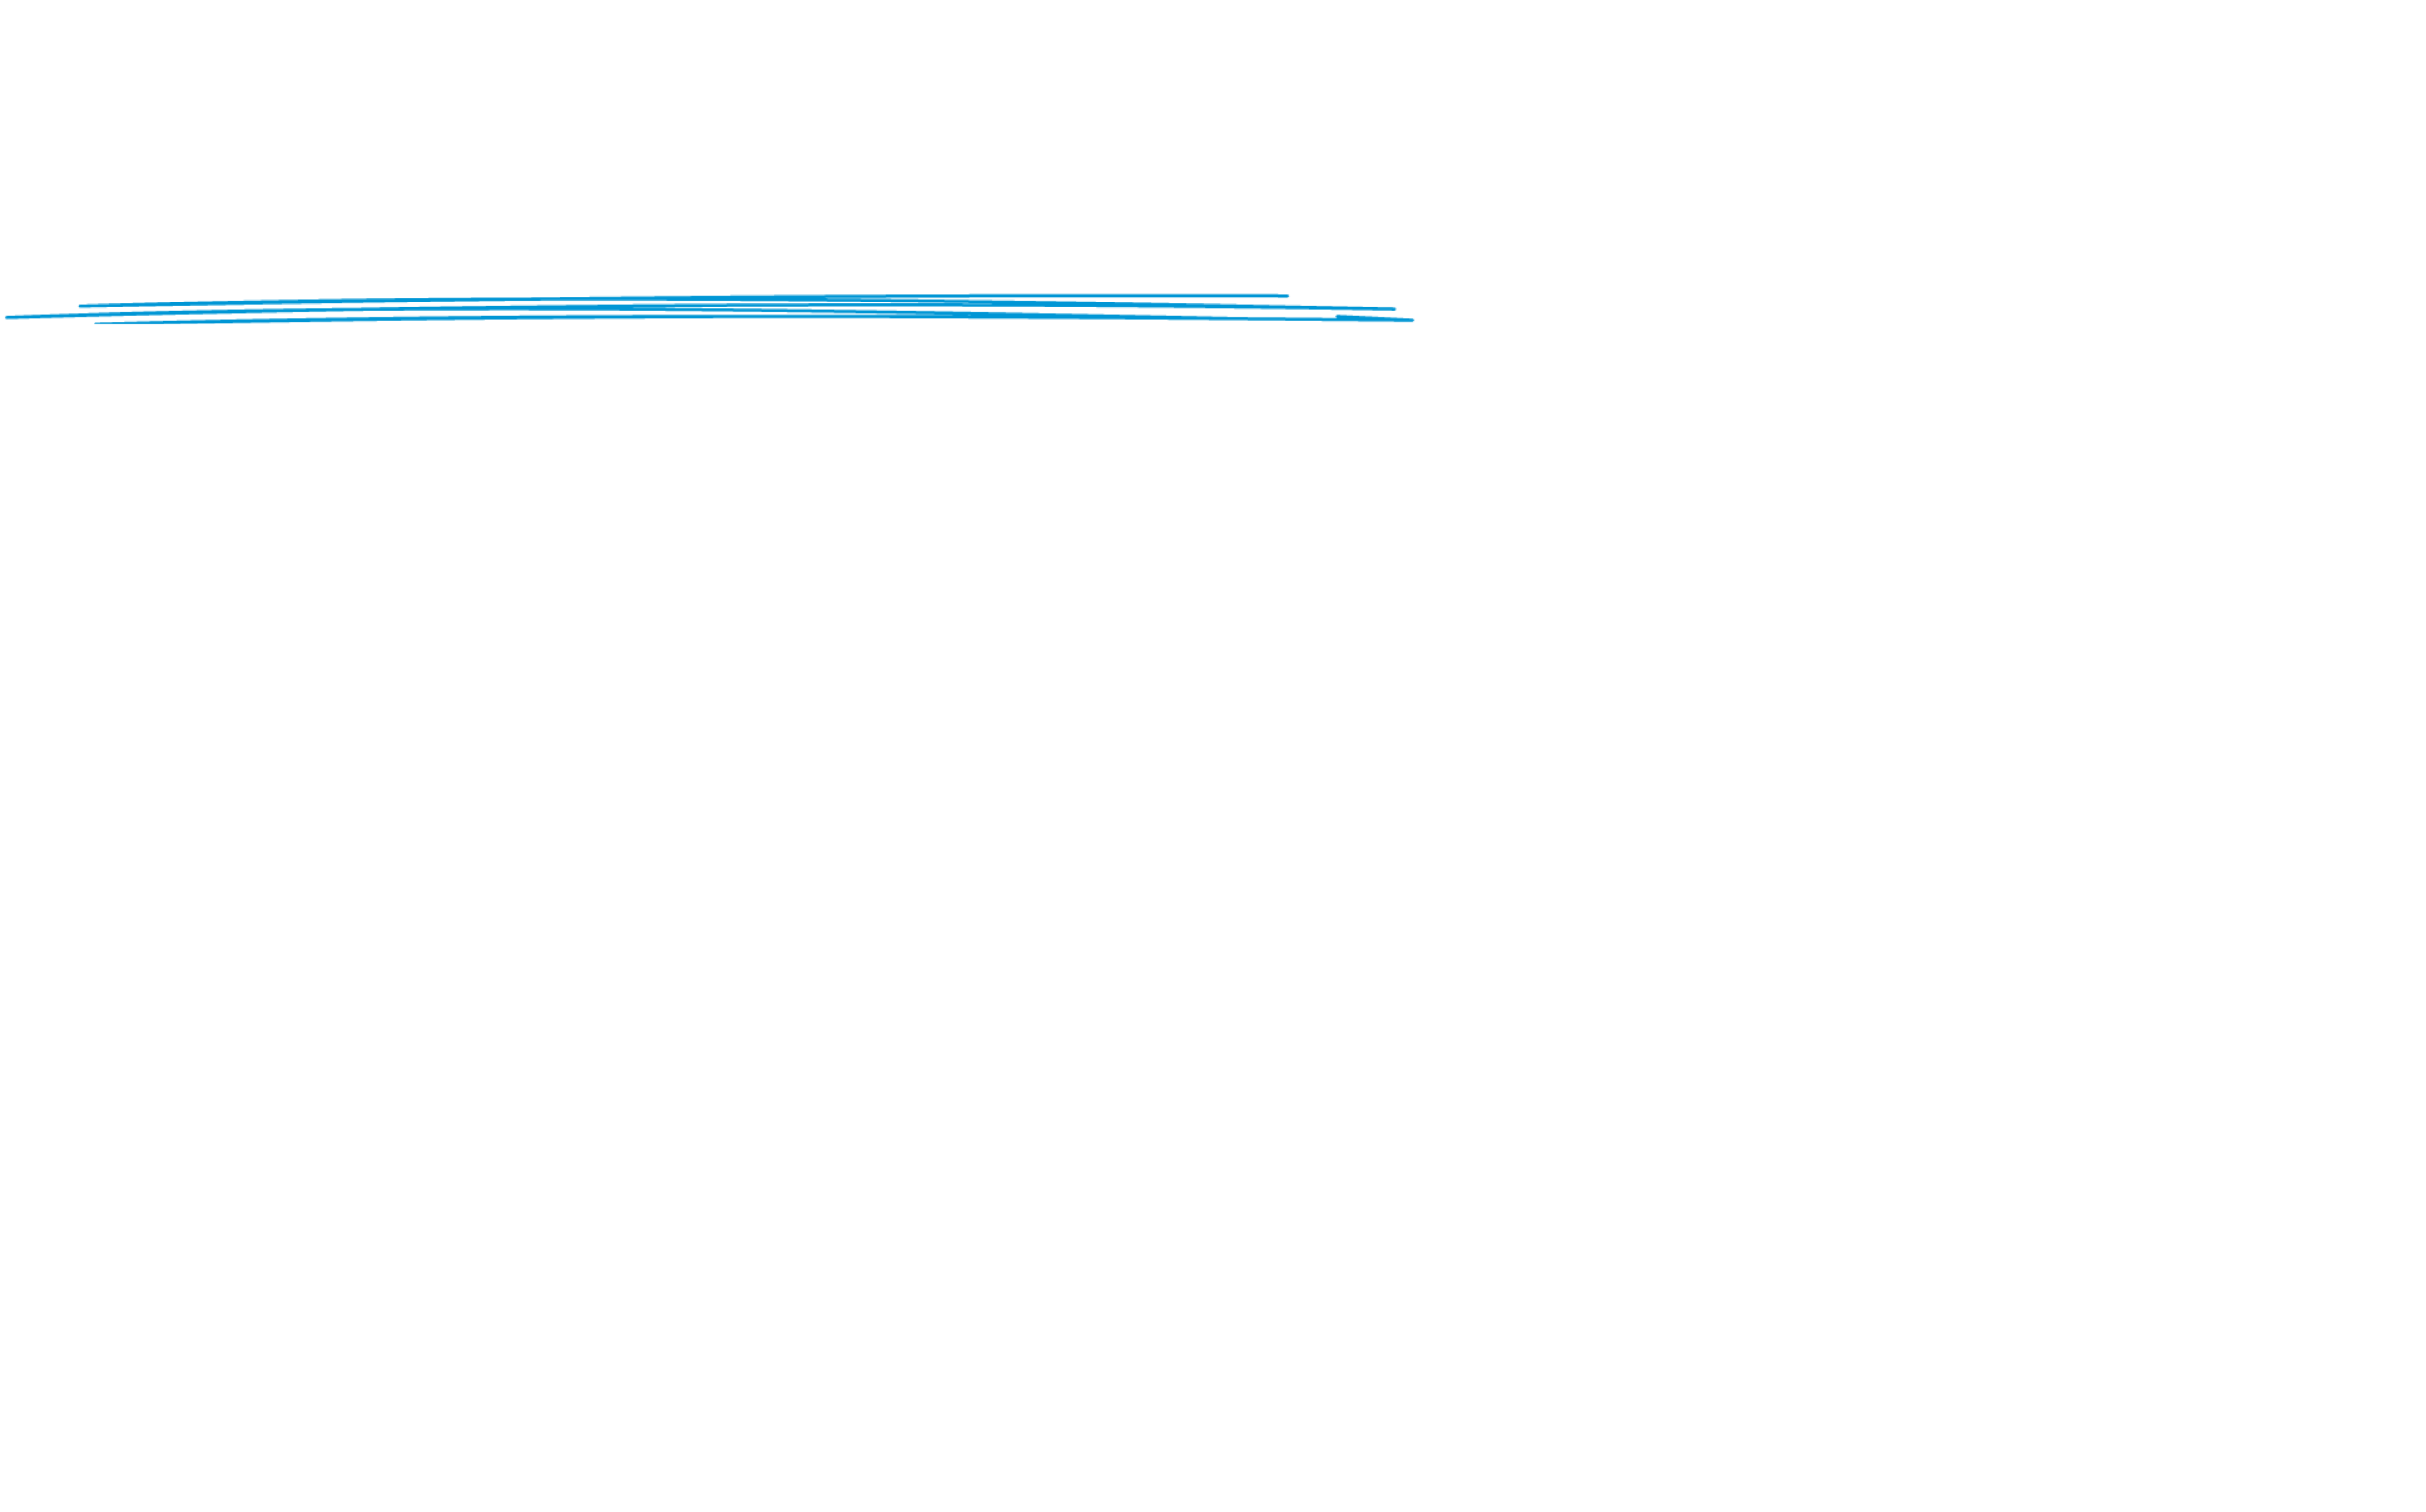 Master your business in just 4 days